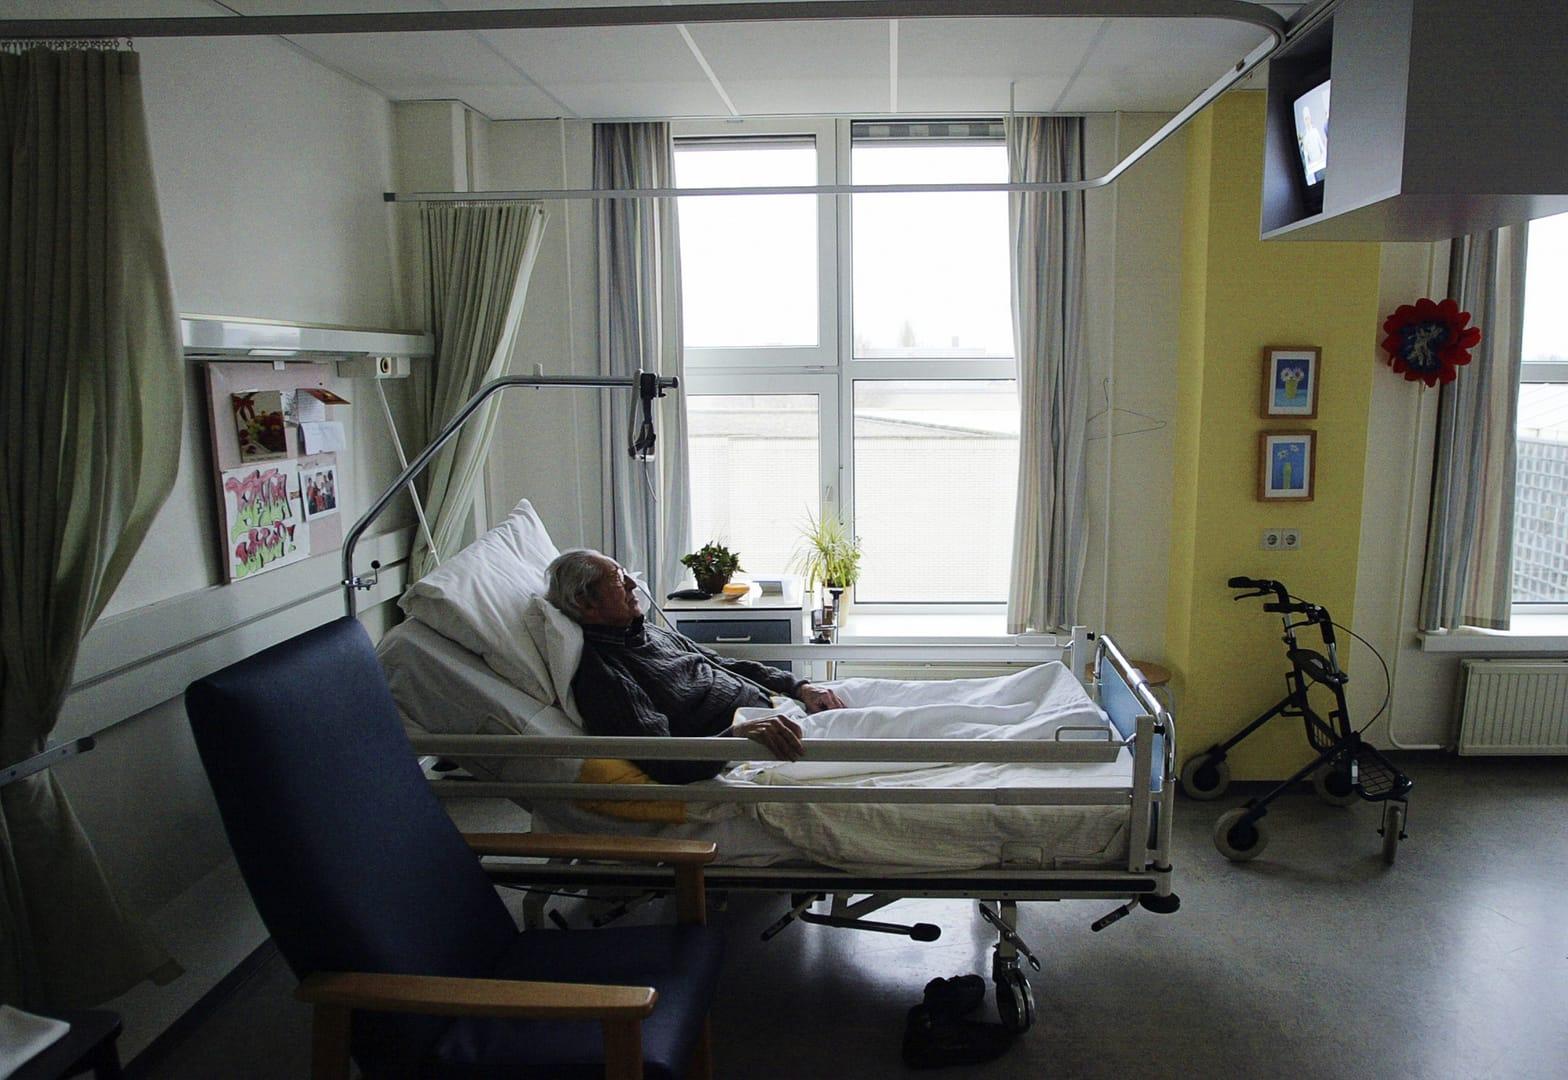 New book looks at ‘dark side’ of euthanasia in Netherlands